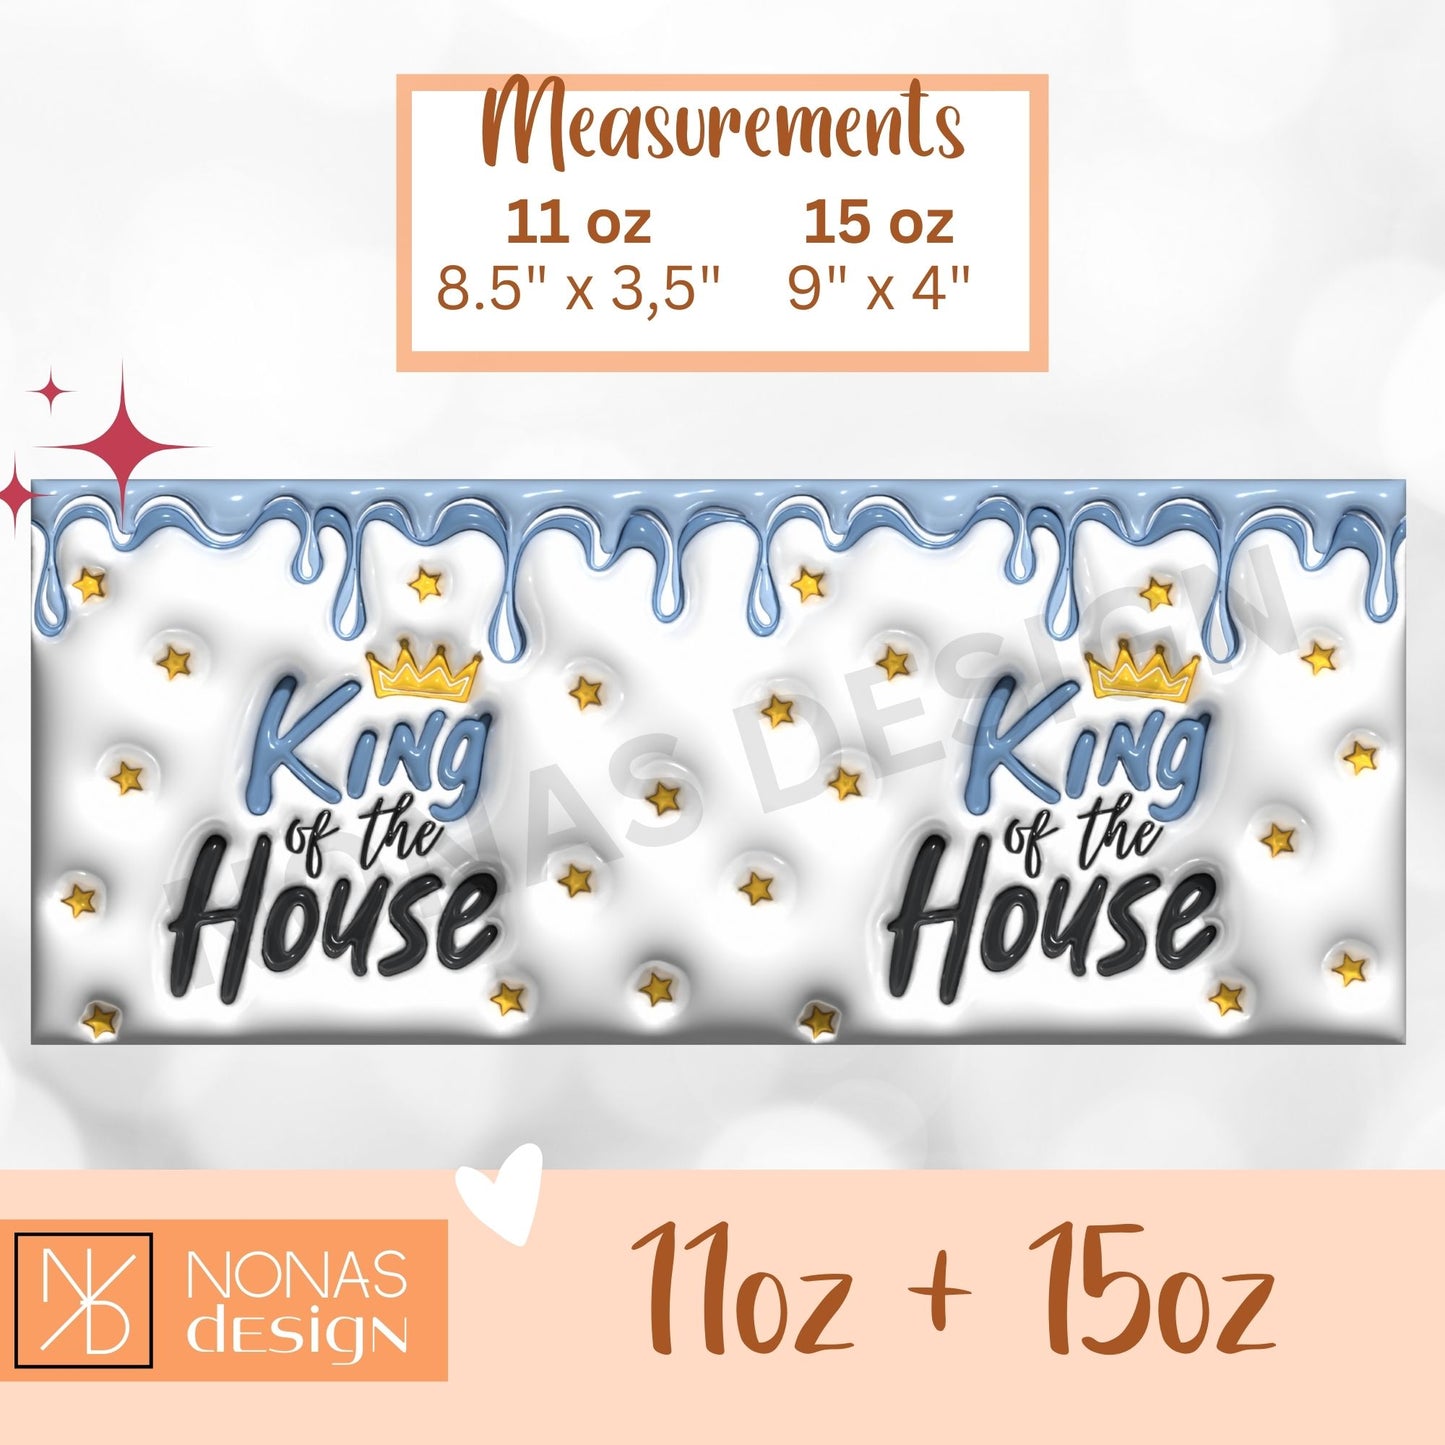 King of the House - 3D